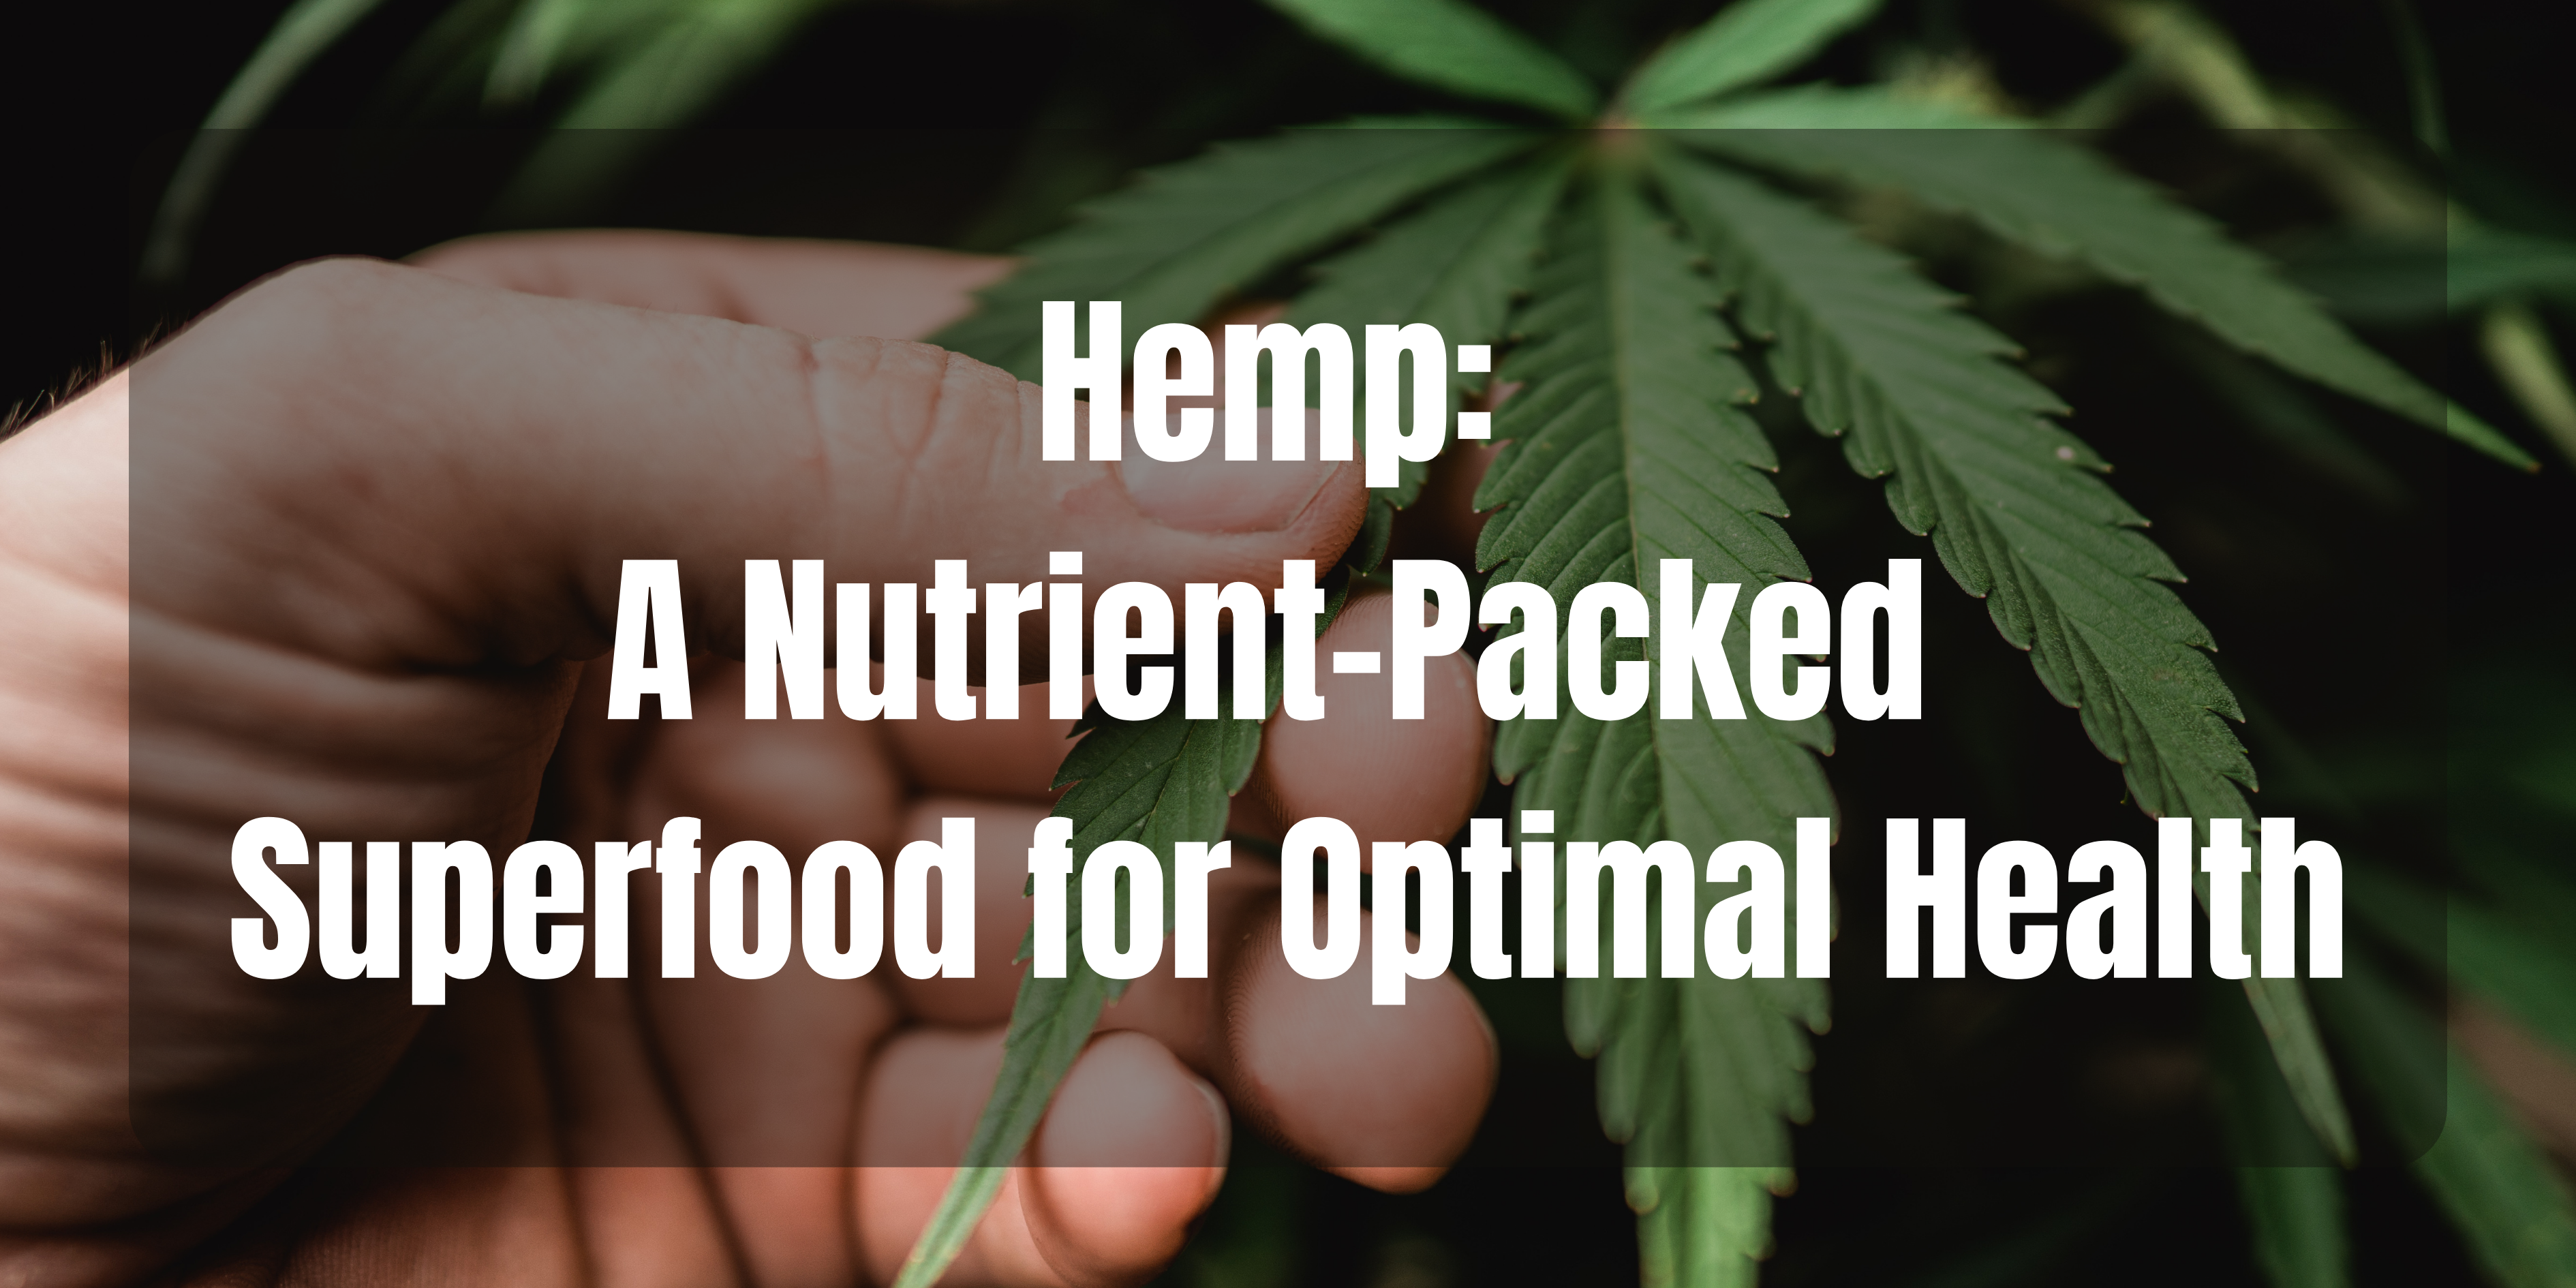 Hemp: A Nutrient-Packed Superfood for Optimal Health